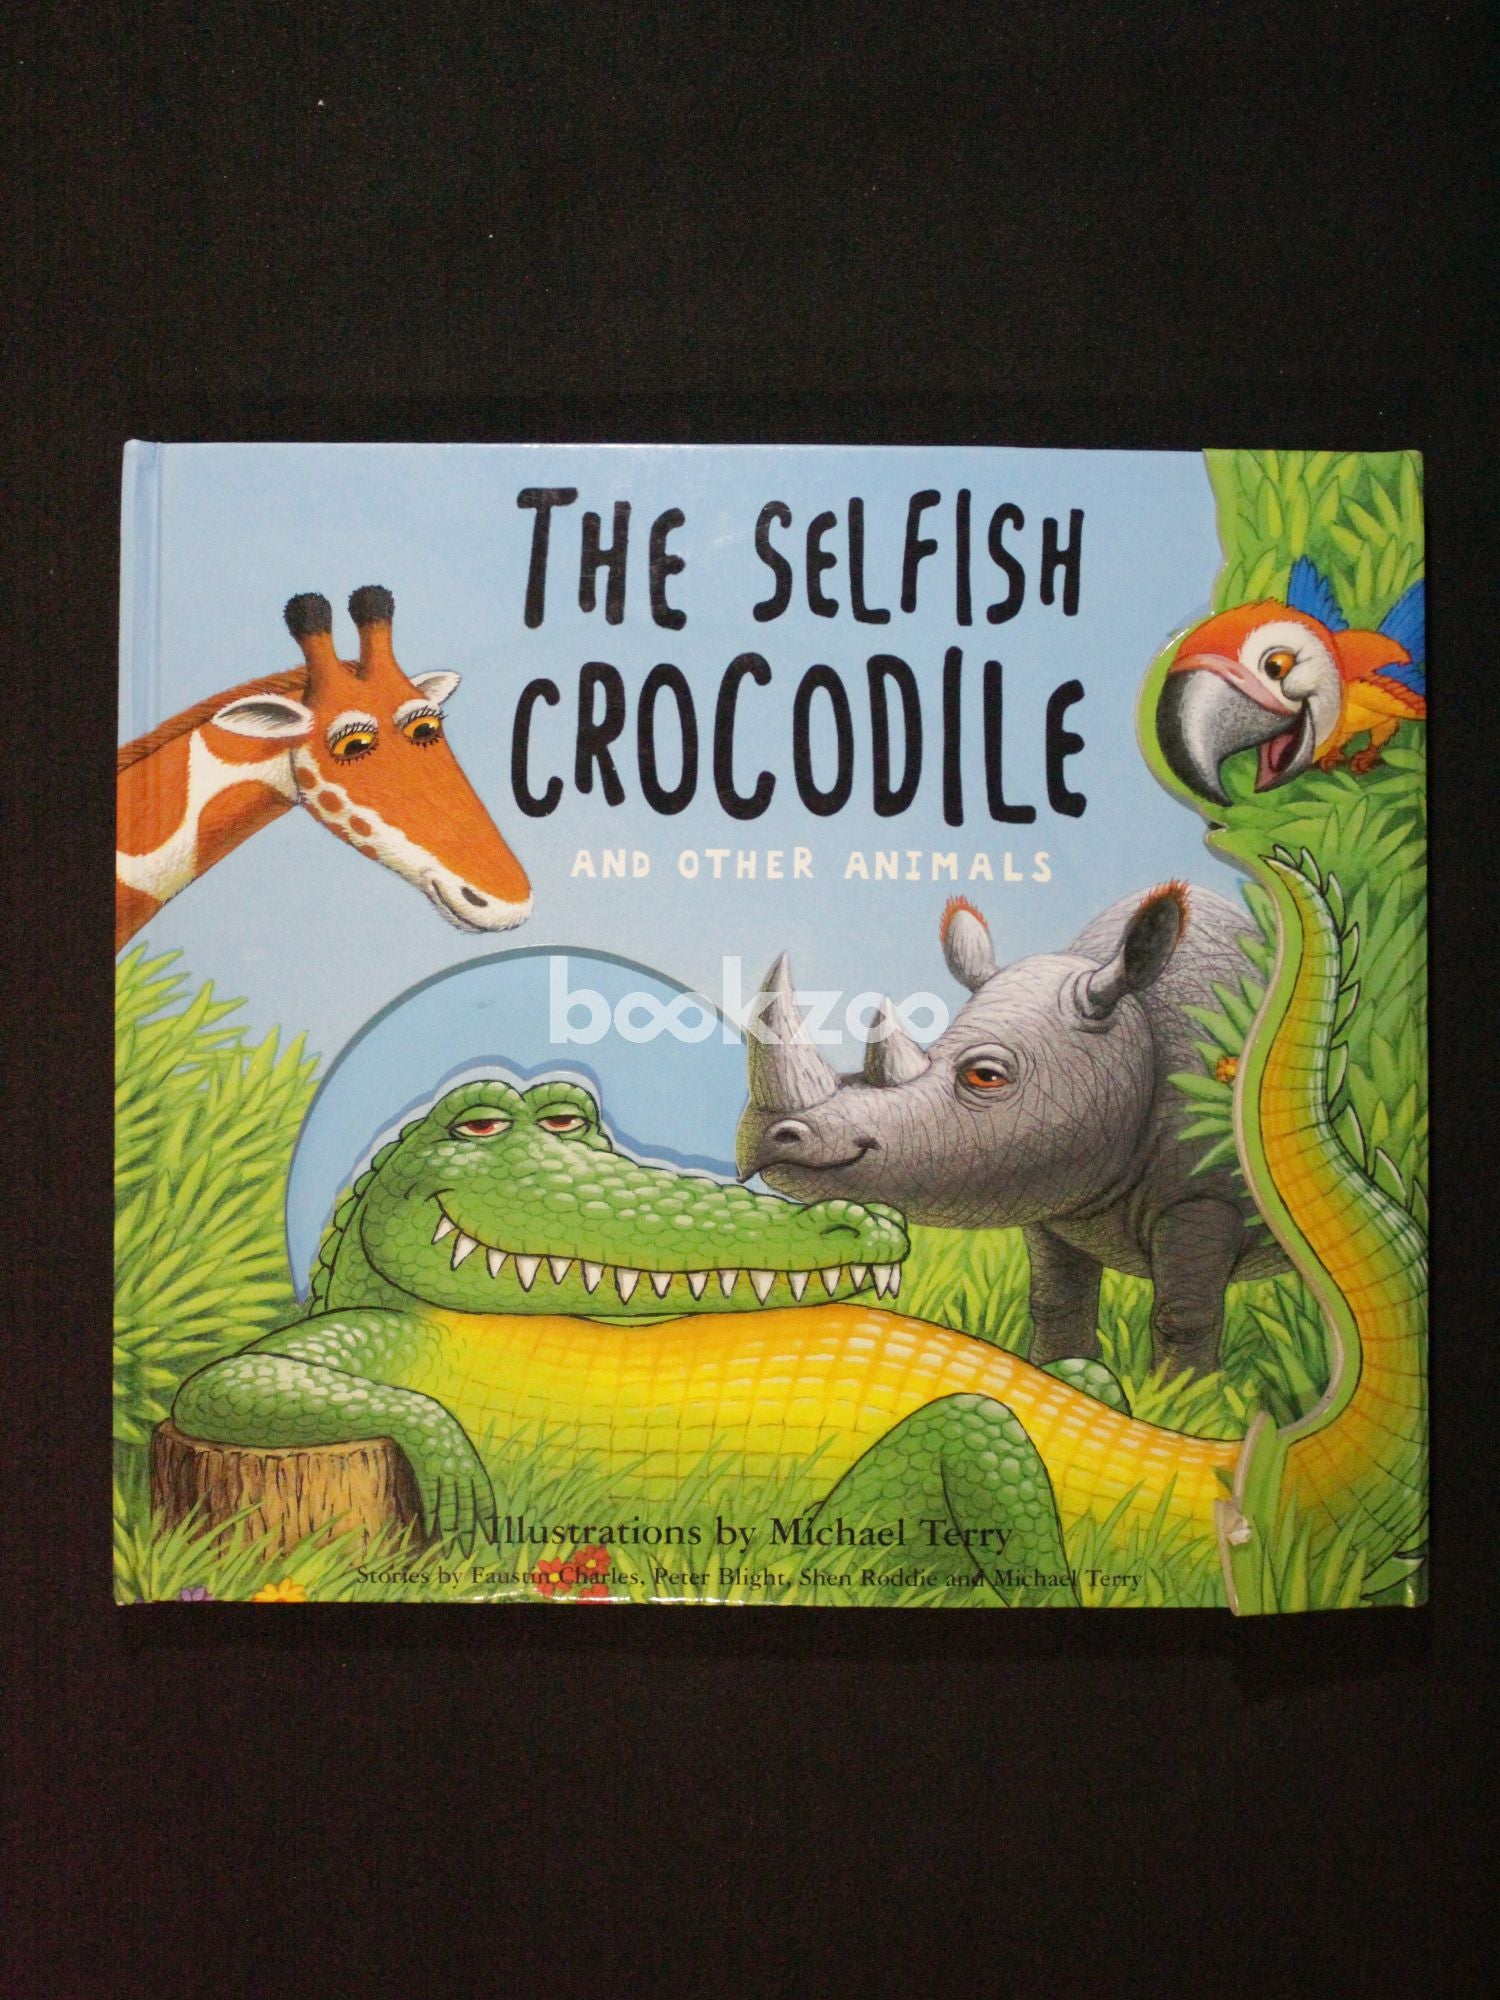 Michael　Faustin　bookstore　—　Selfish　Buy　at　And　Other　Terry　Animals　Charles　by　Online　The　Crocodile